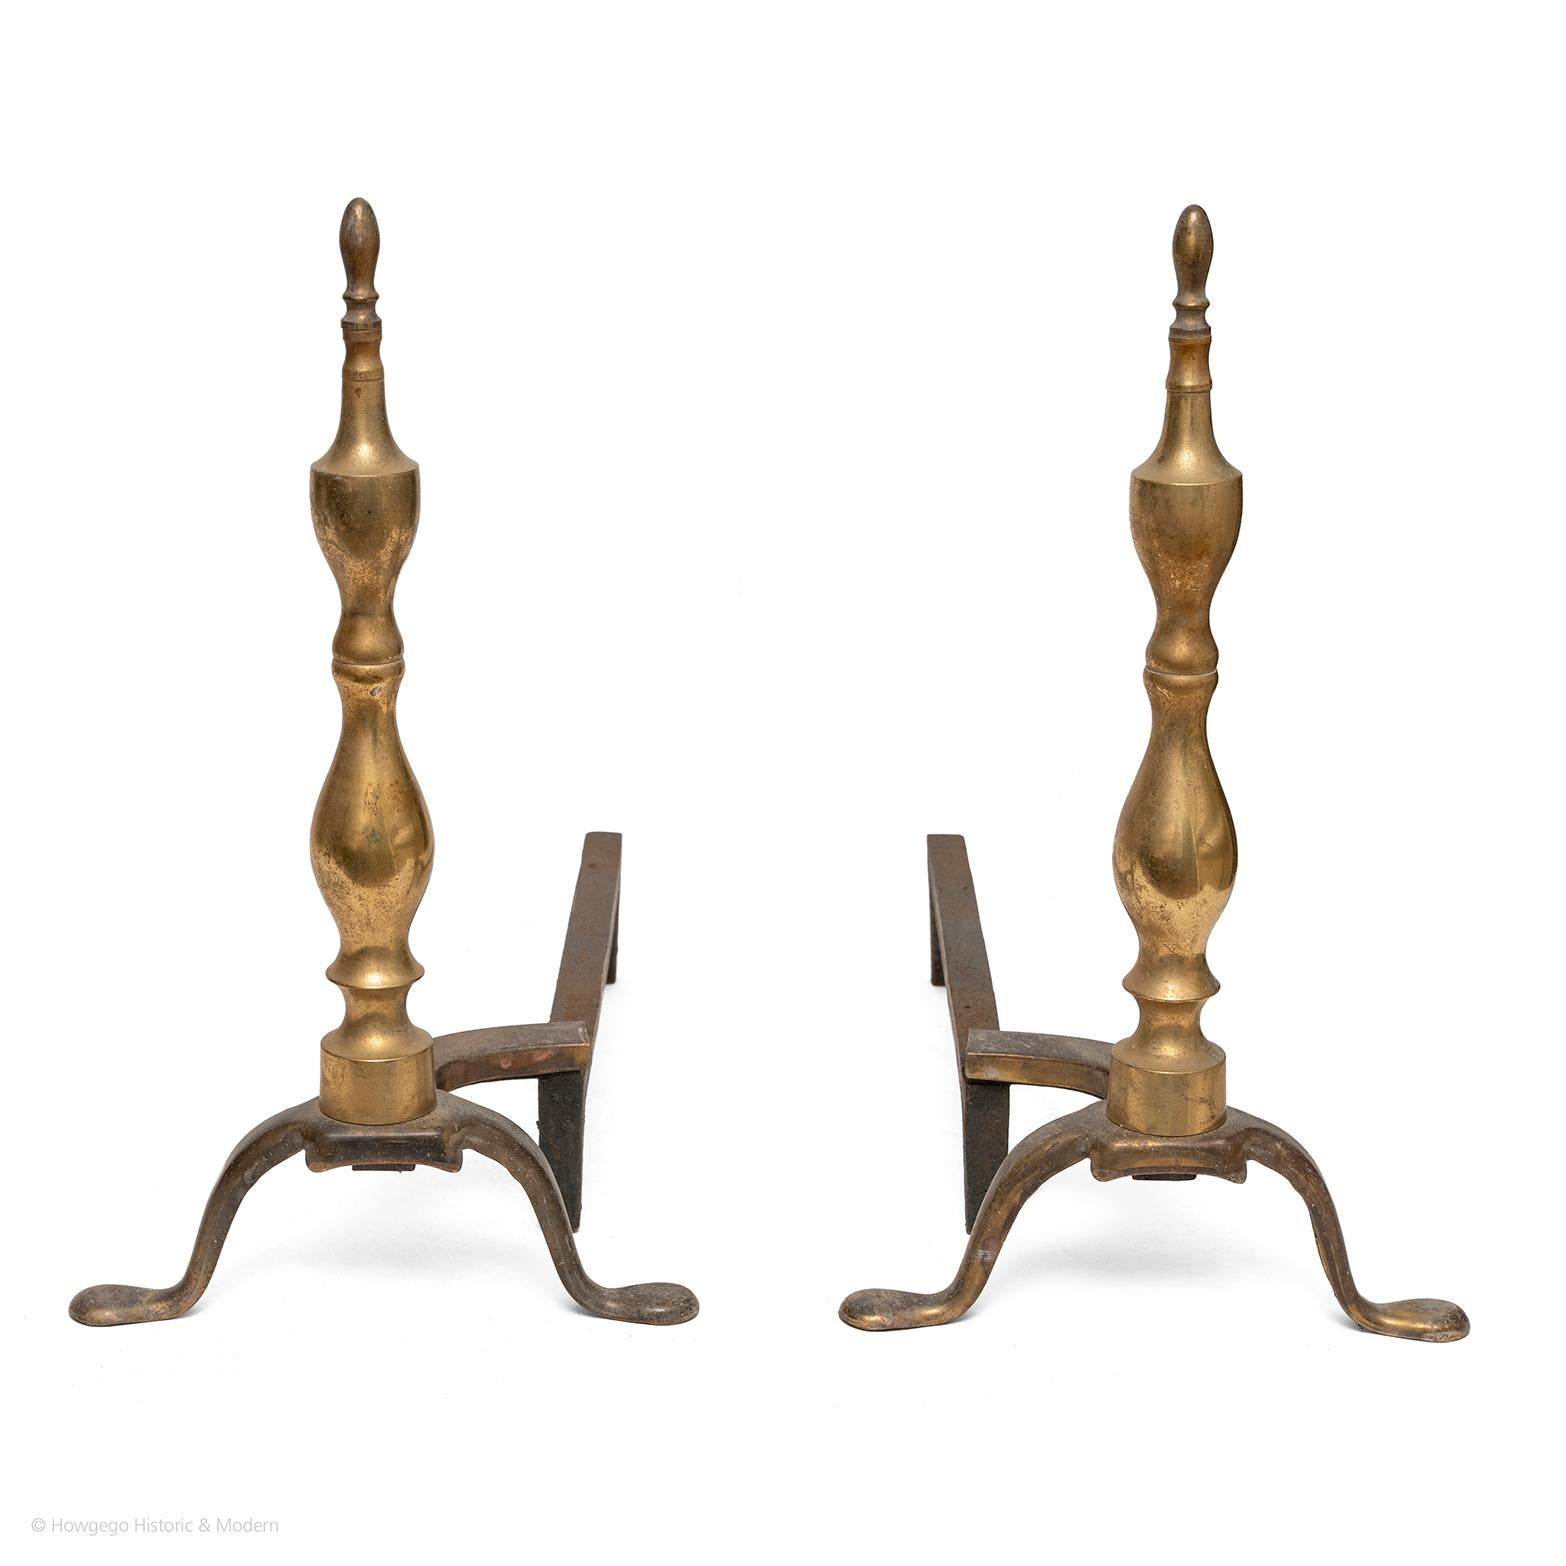 Elegant pair of brass and wrought iron firedogs with classic split baluster form inspired by Neoclassical design
The height creates a sleek elegance
The brass reflects the light from the fire into the interior
Soft patina, can be polished if